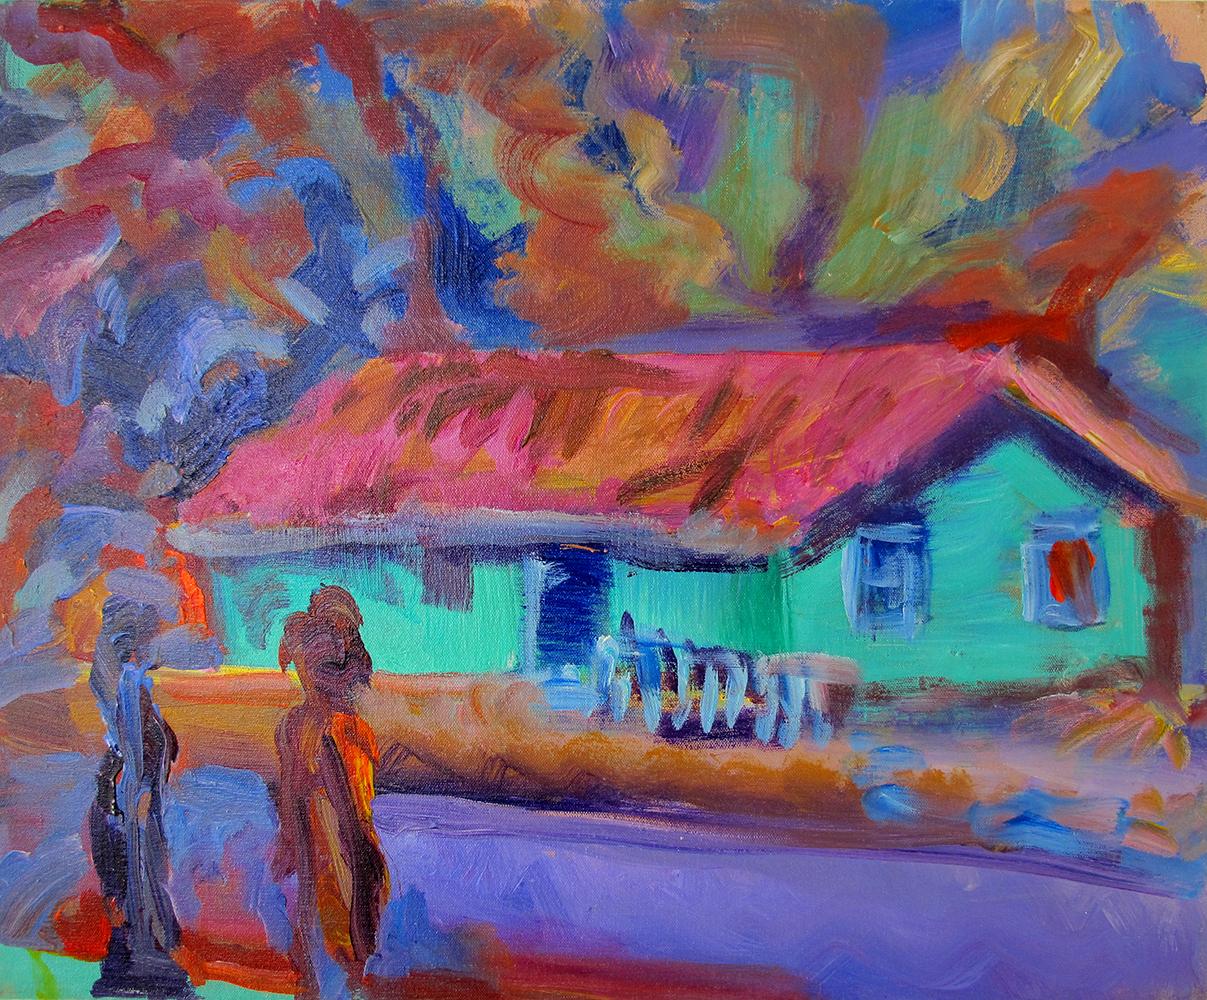 Toni Franovic Figurative Painting - The Green House - figurative oil on linen, rich bold colors, impressionist style